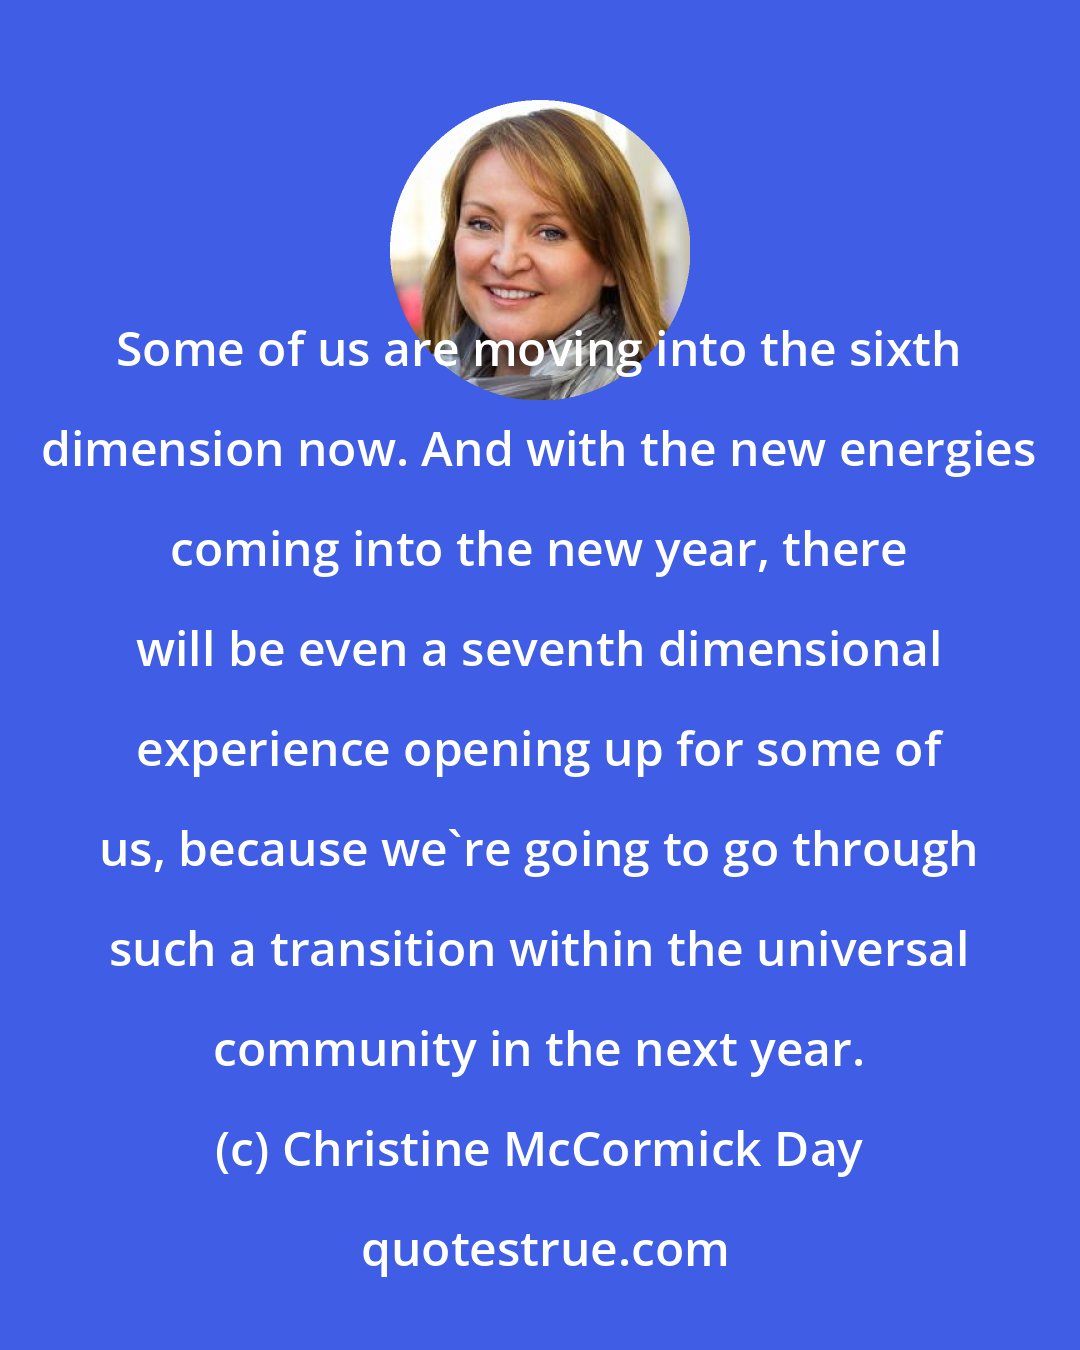 Christine McCormick Day: Some of us are moving into the sixth dimension now. And with the new energies coming into the new year, there will be even a seventh dimensional experience opening up for some of us, because we're going to go through such a transition within the universal community in the next year.